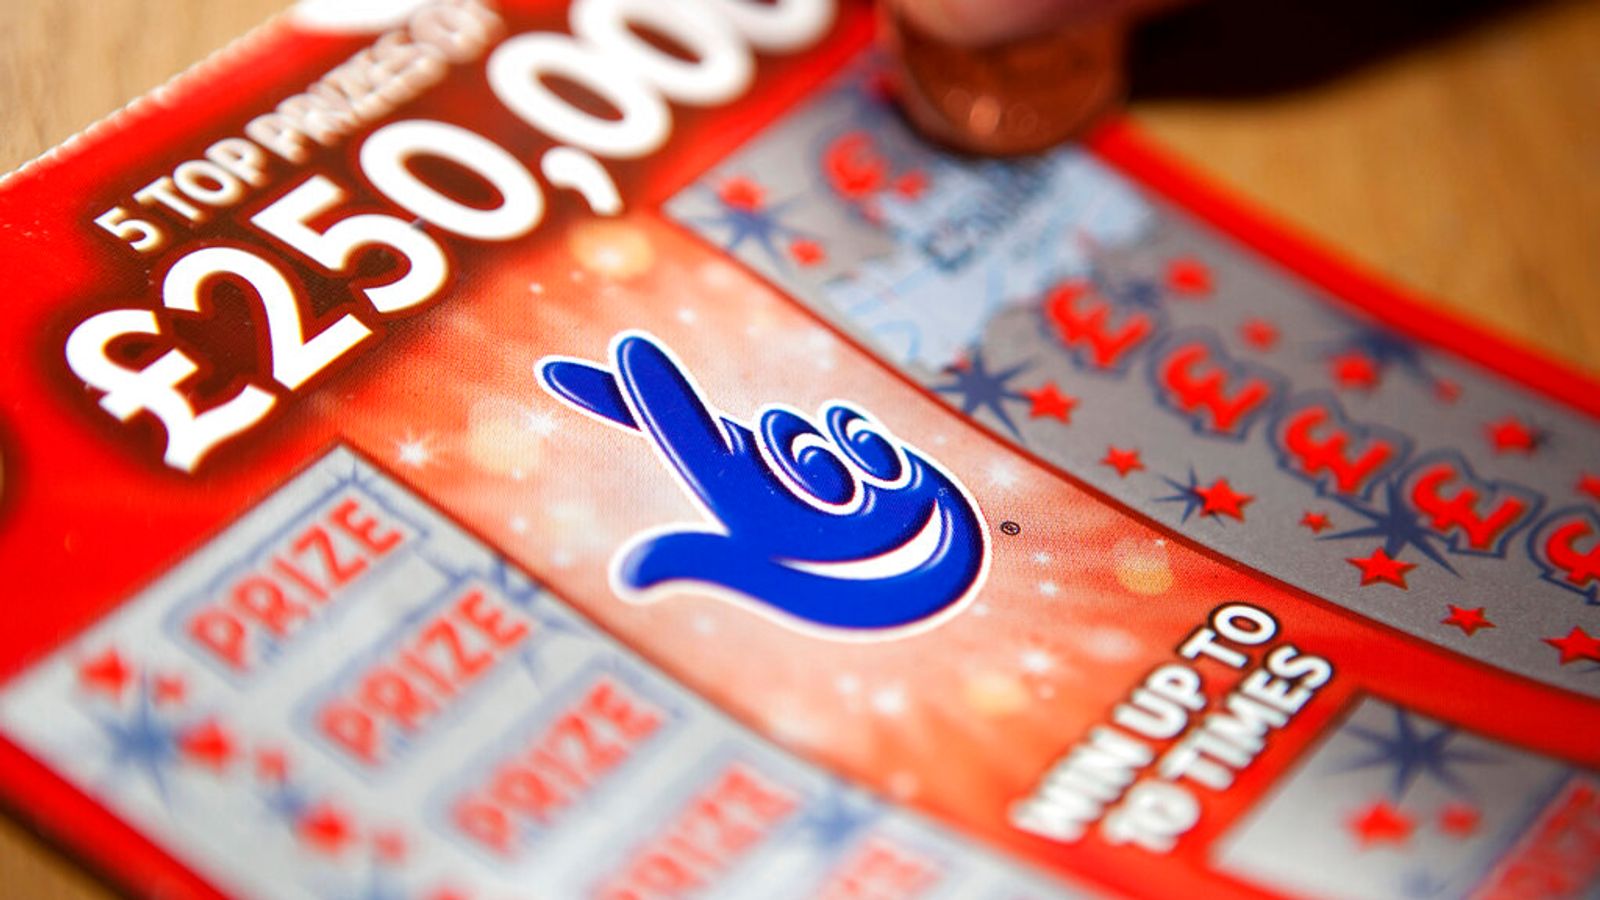 Woman sues National Lottery operator claiming she won £1m